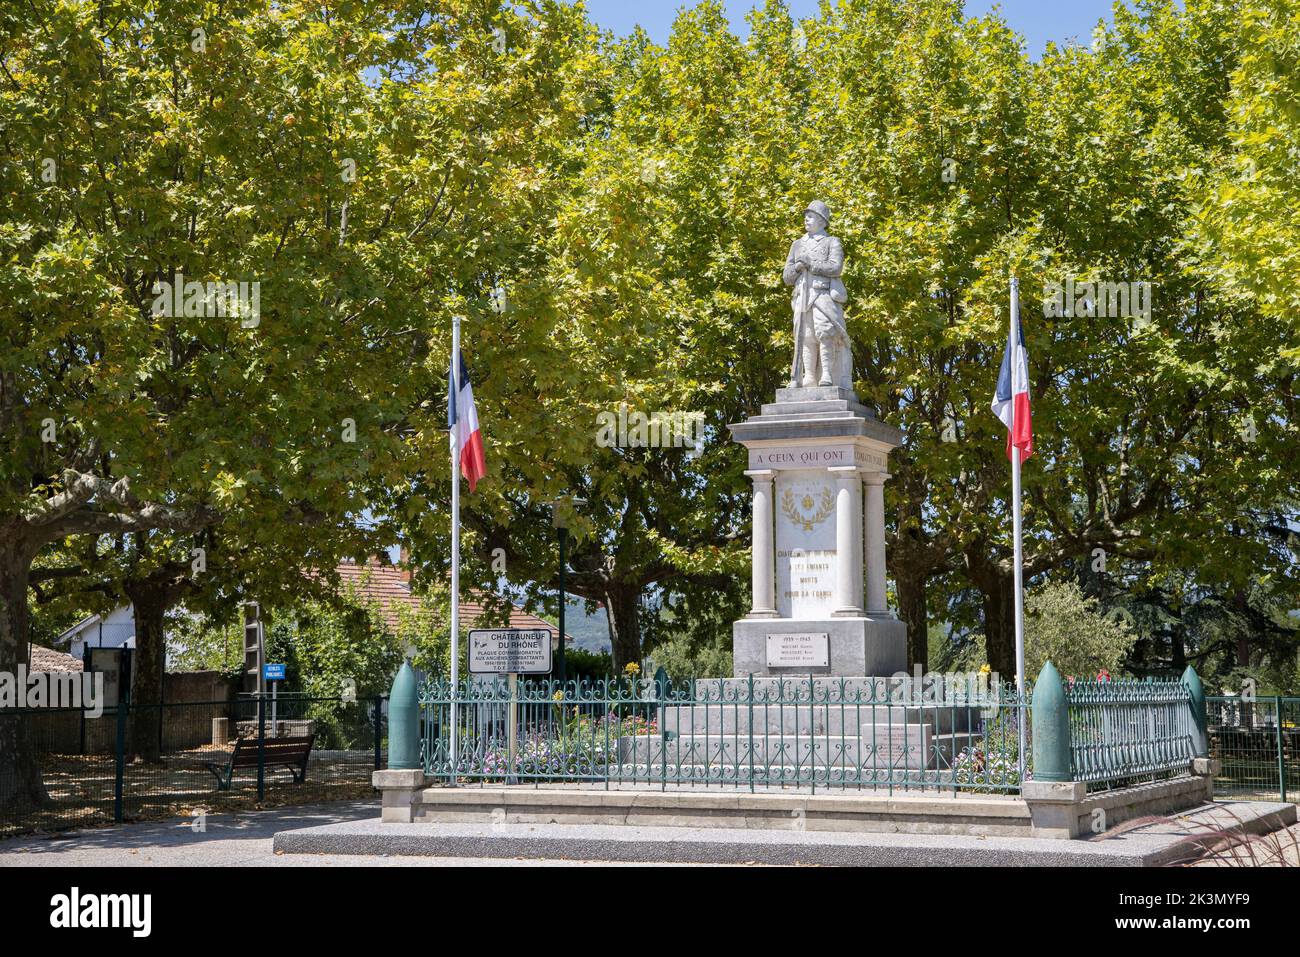 First world war memorial in Chateauneuf-du-Rhone, France Stock Photo